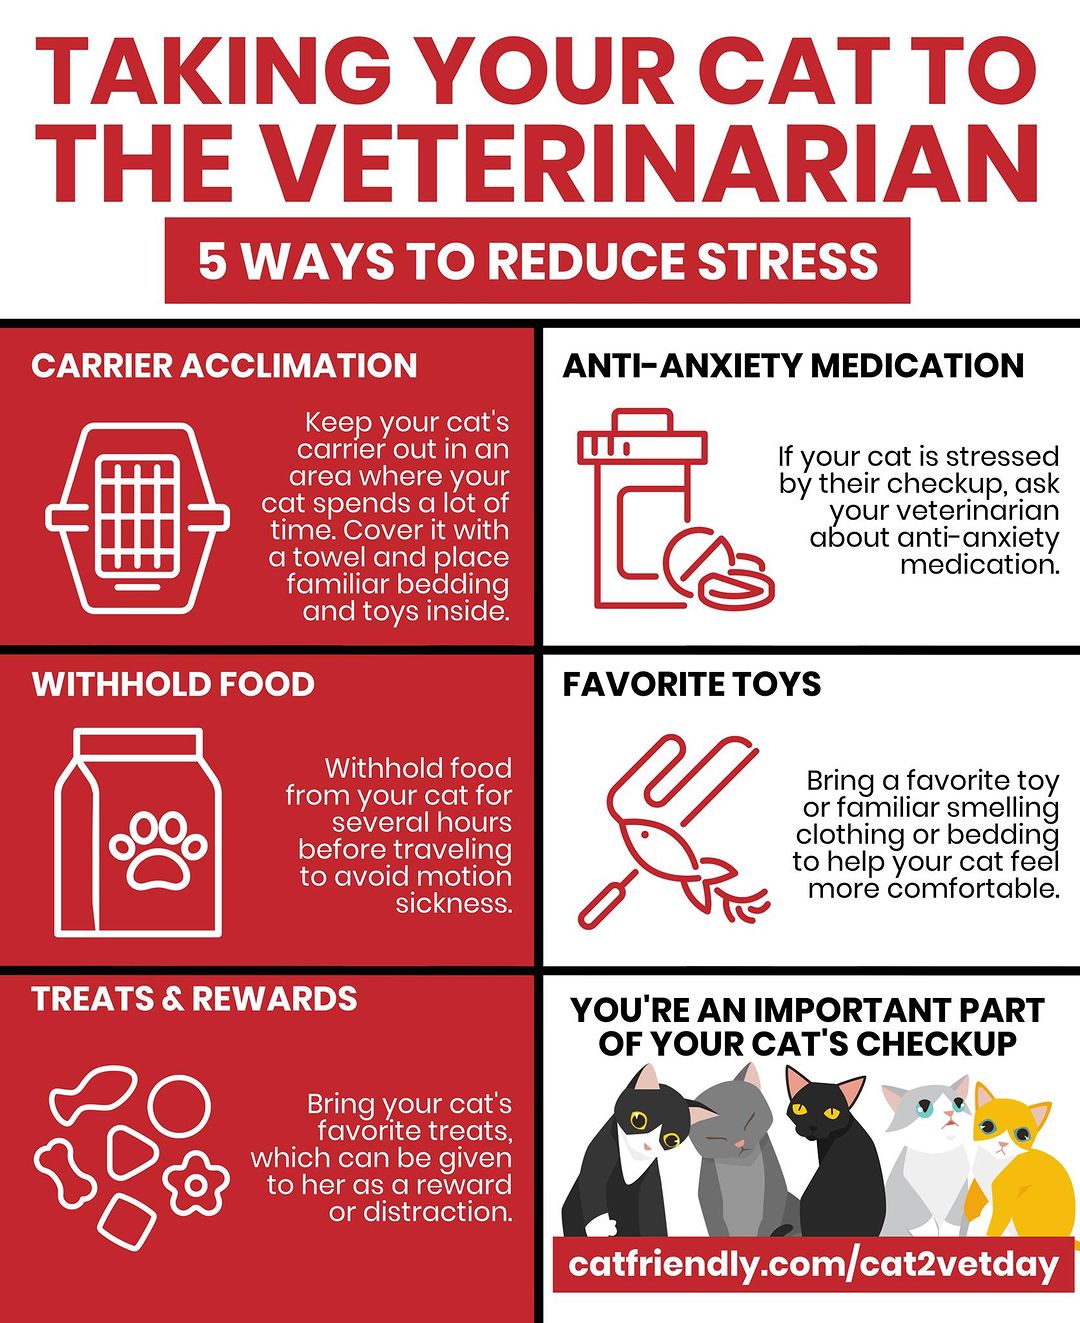 58% of cat owners report their cat hates going to the vet. Here are 5 easy wa...